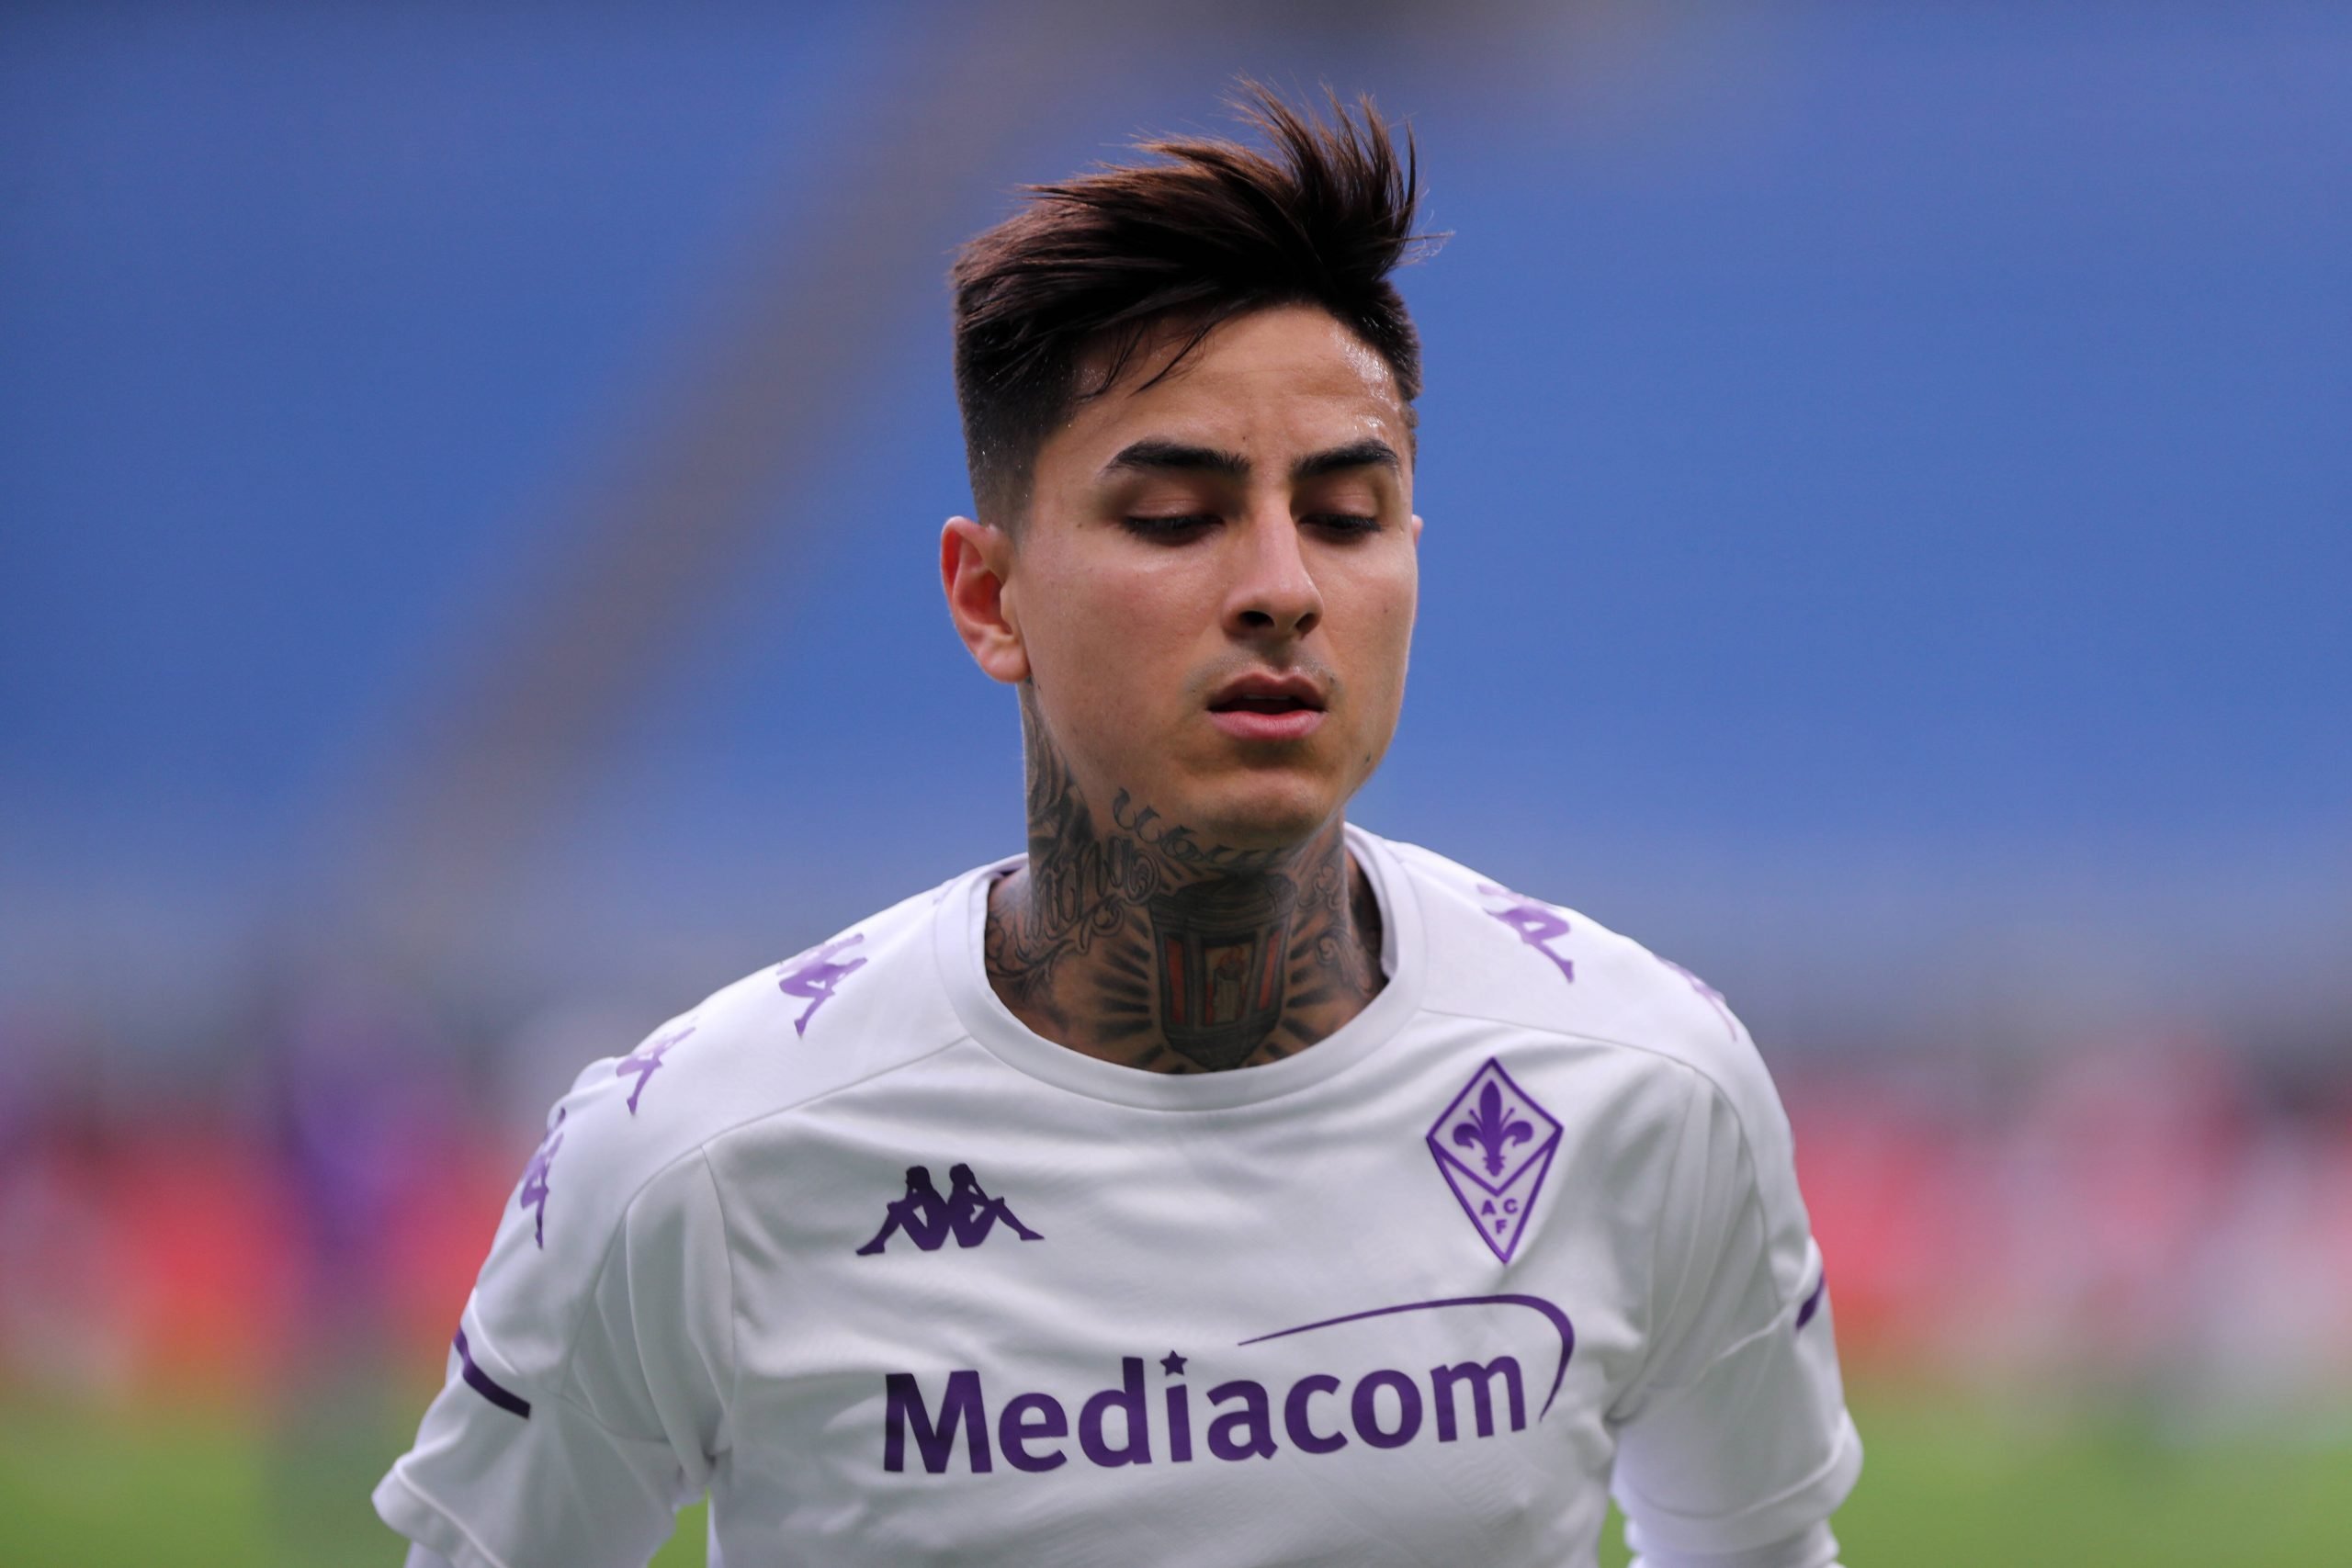 Leeds United have cooled their interest in Erick Pulgar - A good decision?